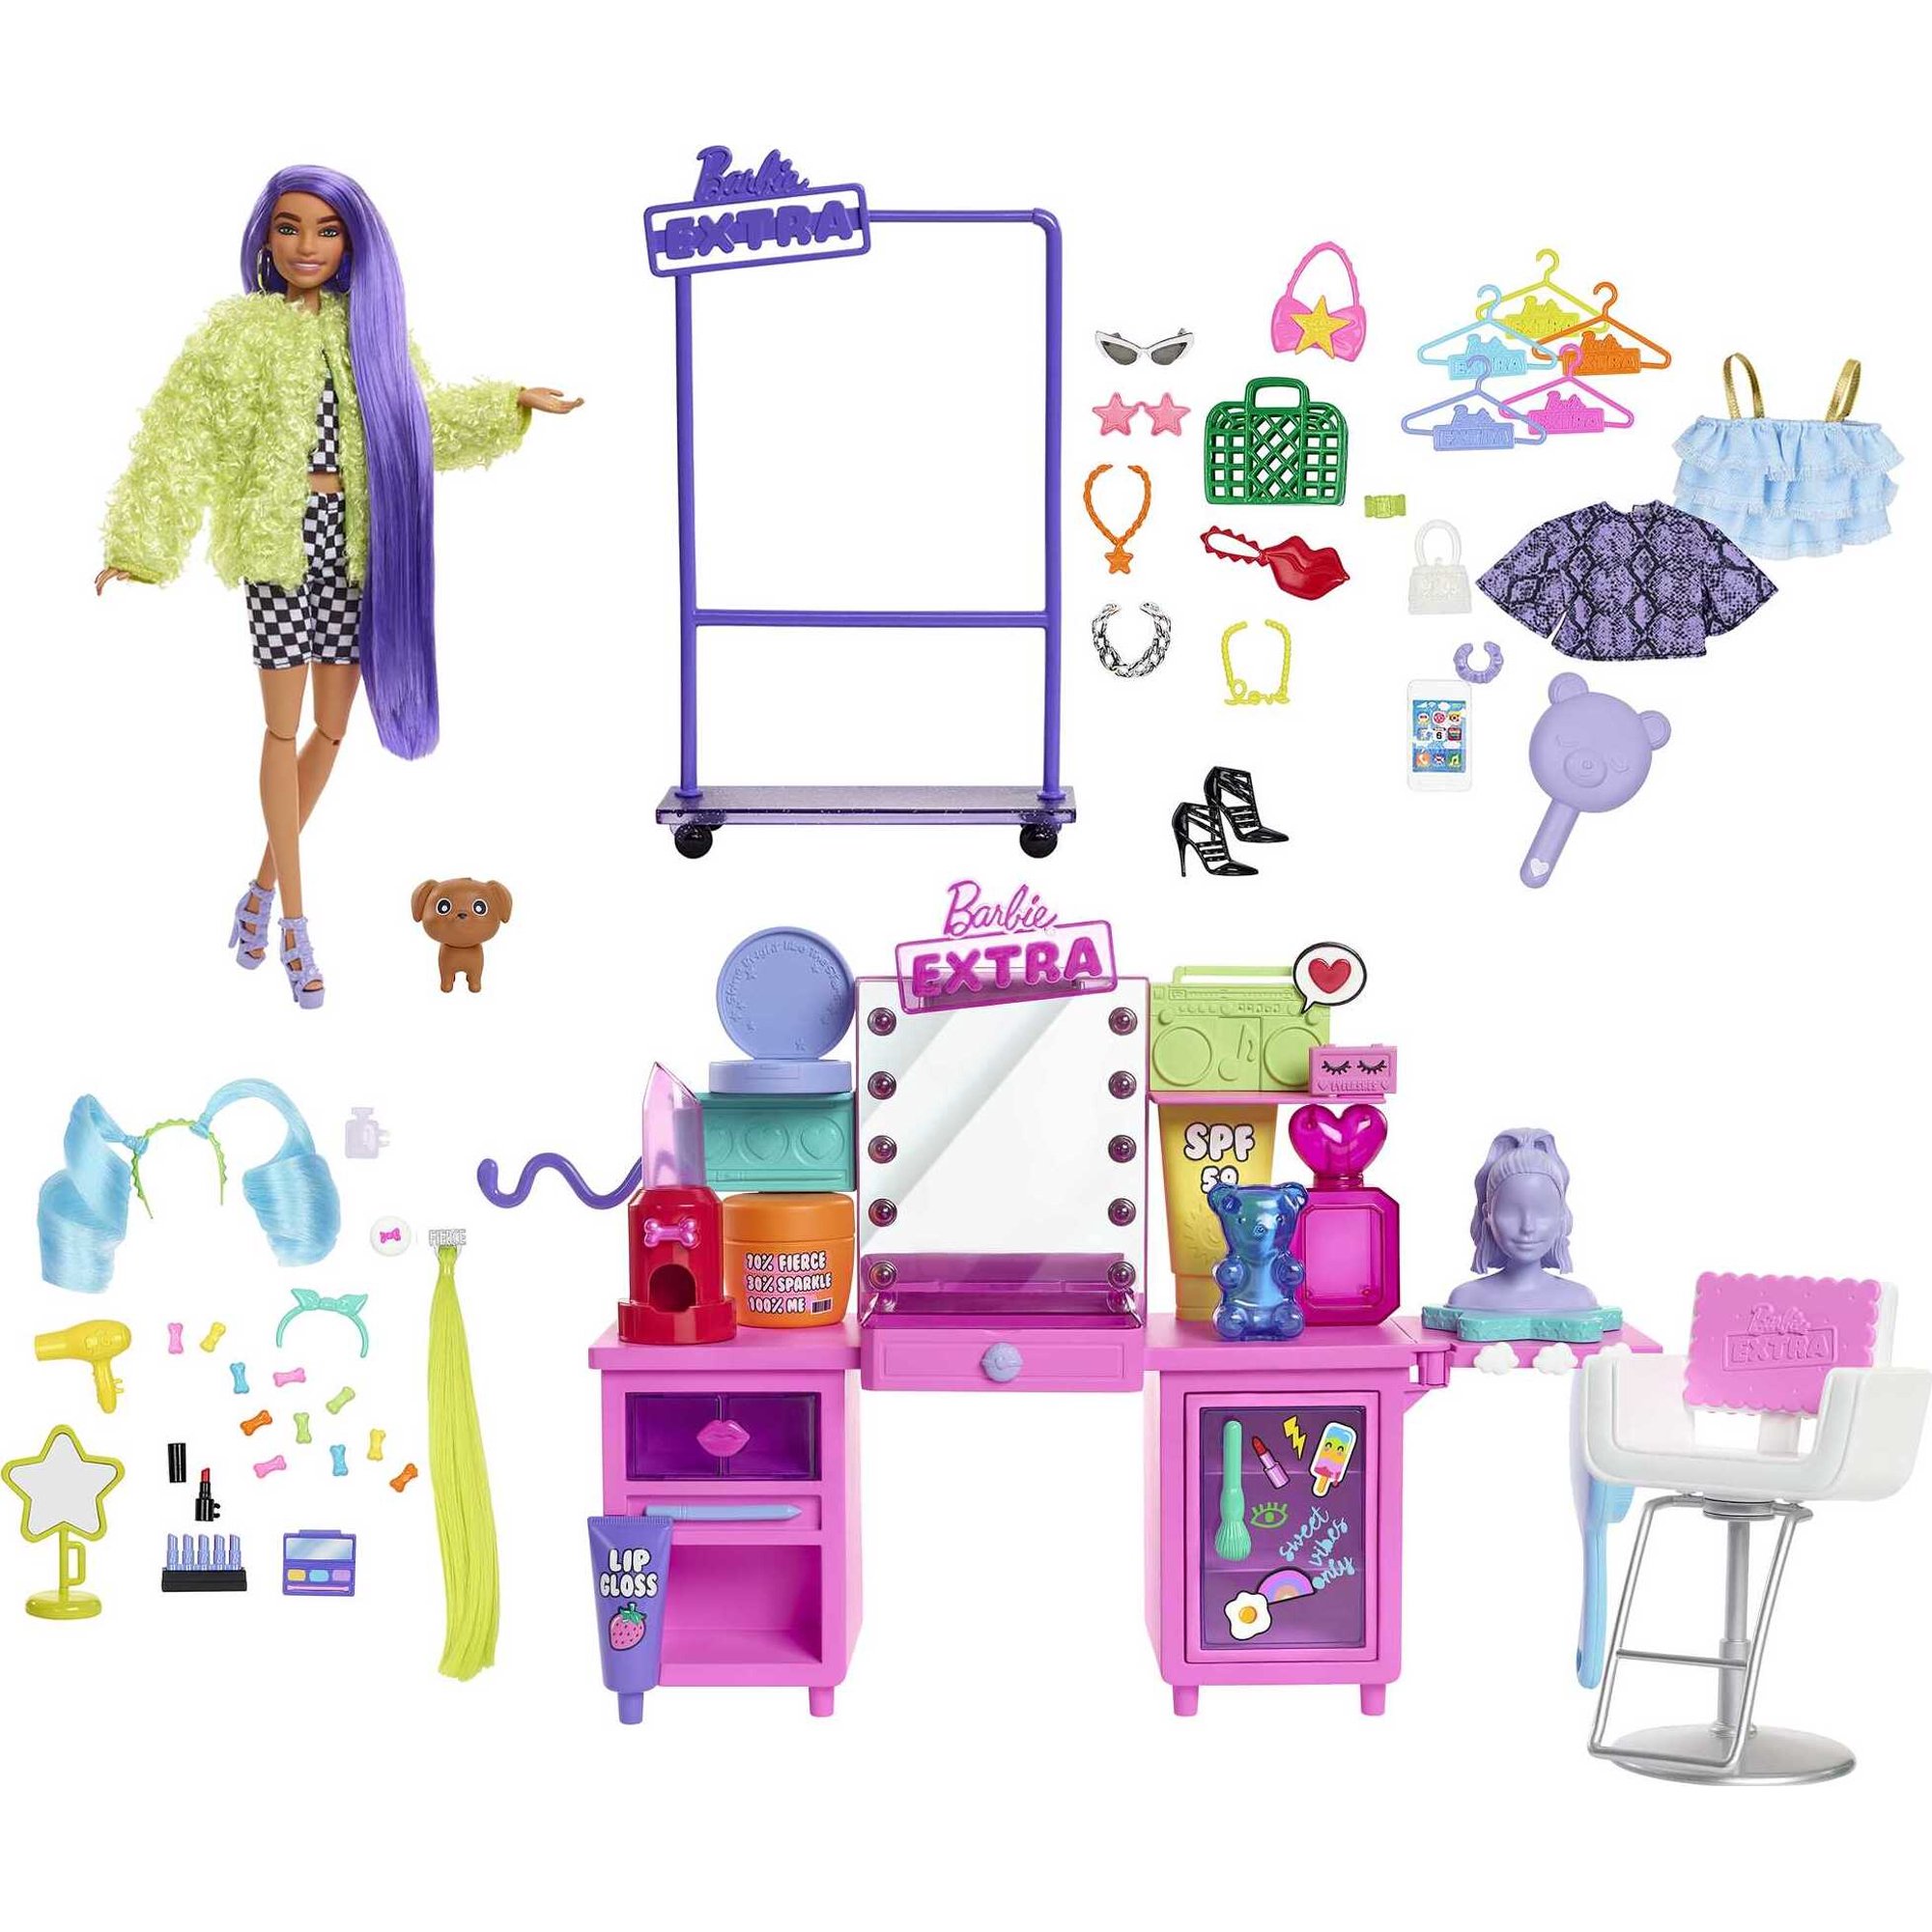 Barbie Extra Doll & Vanity Playset with Doll, Pet Puppy, Vanity & 45+ Pieces